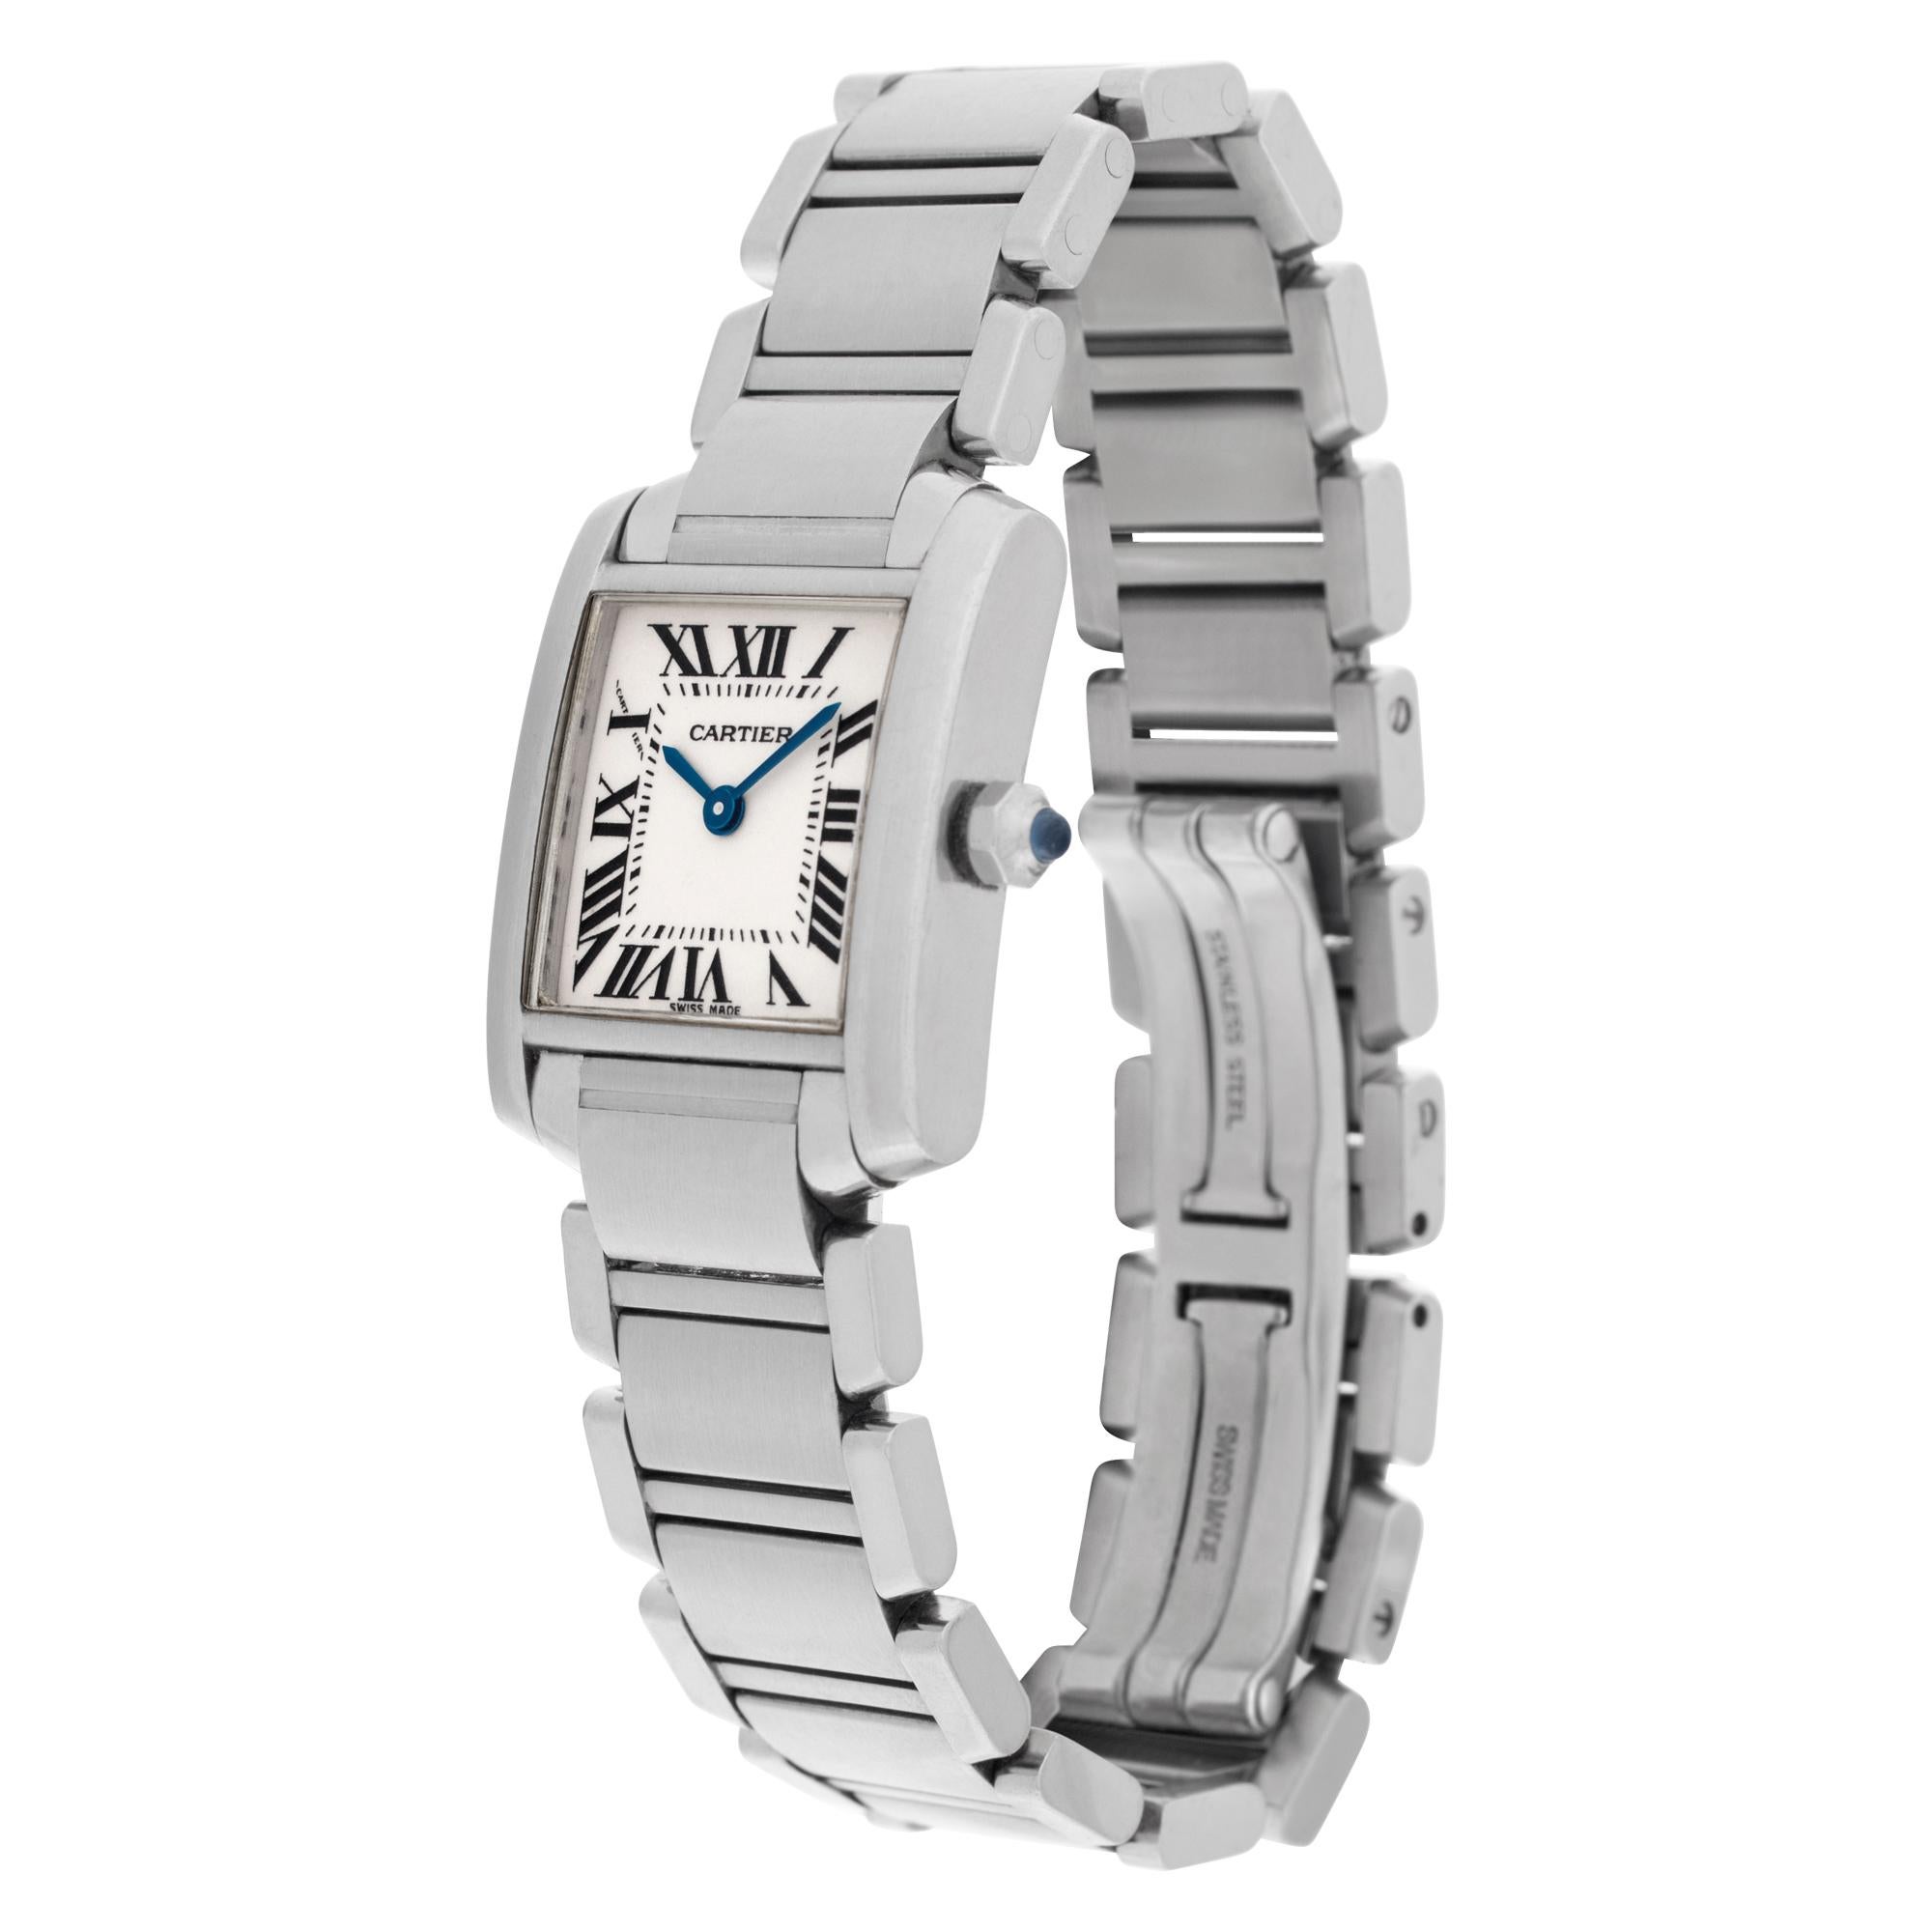 Cartier Tank Francaise in stainless steel. Quartz. Case size 20 mm width and 25 mm length lug to lug. Ref W51008q3. Circa 2010s. Fine Pre-owned Cartier Watch.

Certified preowned Classic Cartier Tank Francaise W51008q3 watch is made out of Stainless